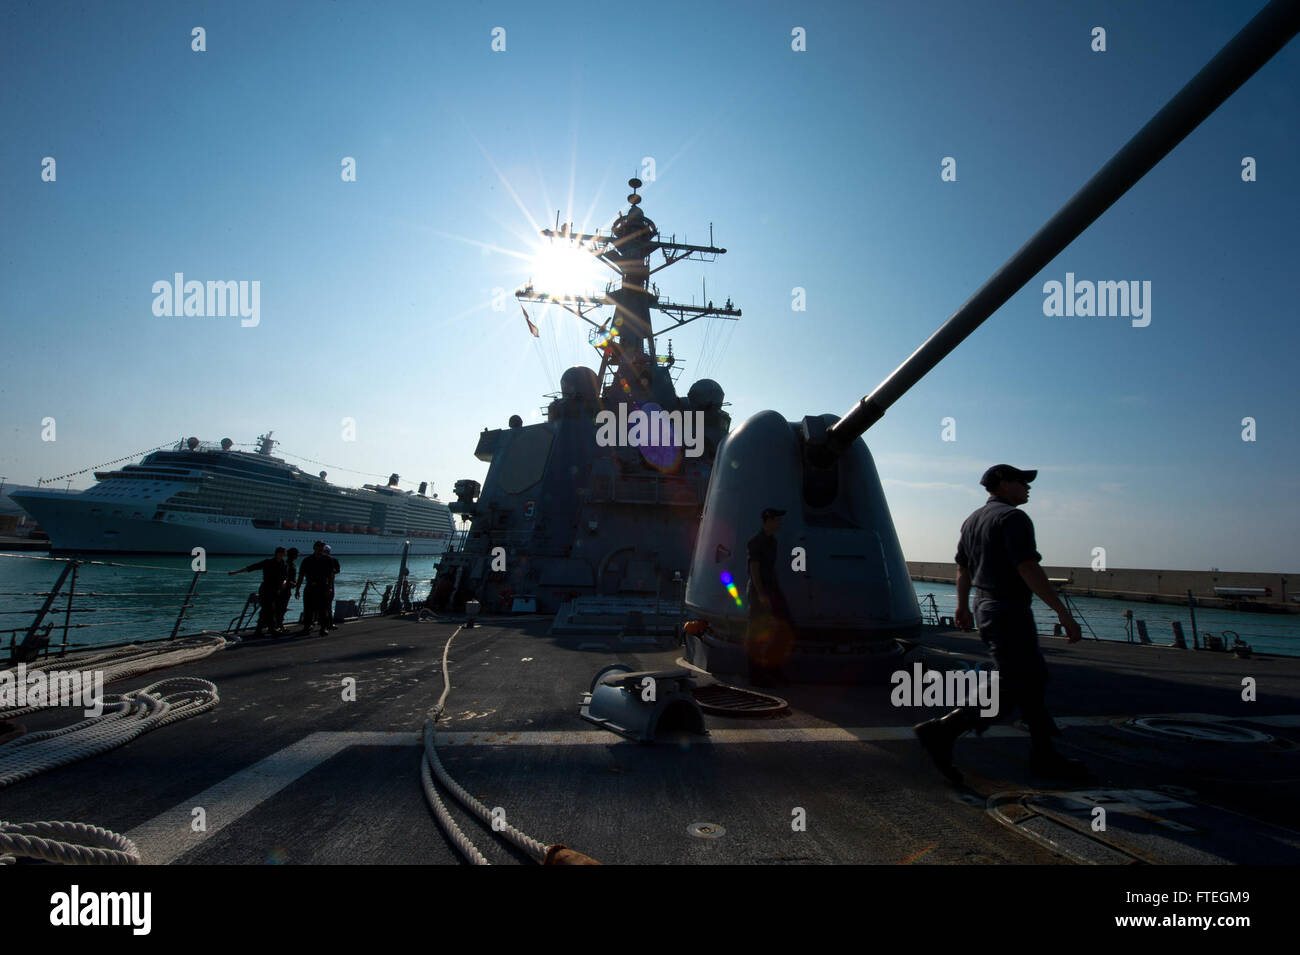 CIVITAVECCHIA, Italy (Oct. 4, 2014) The guided-missile destroyer USS Arleigh Burke (DDG 51) departs Civitavecchia, Italy after a scheduled port visit. Arleigh Burke, homeported in Norfolk, Va., is conducting naval operations in the U.S. 6th Fleet area of operations in support of U.S. national security interests in Europe. Stock Photo